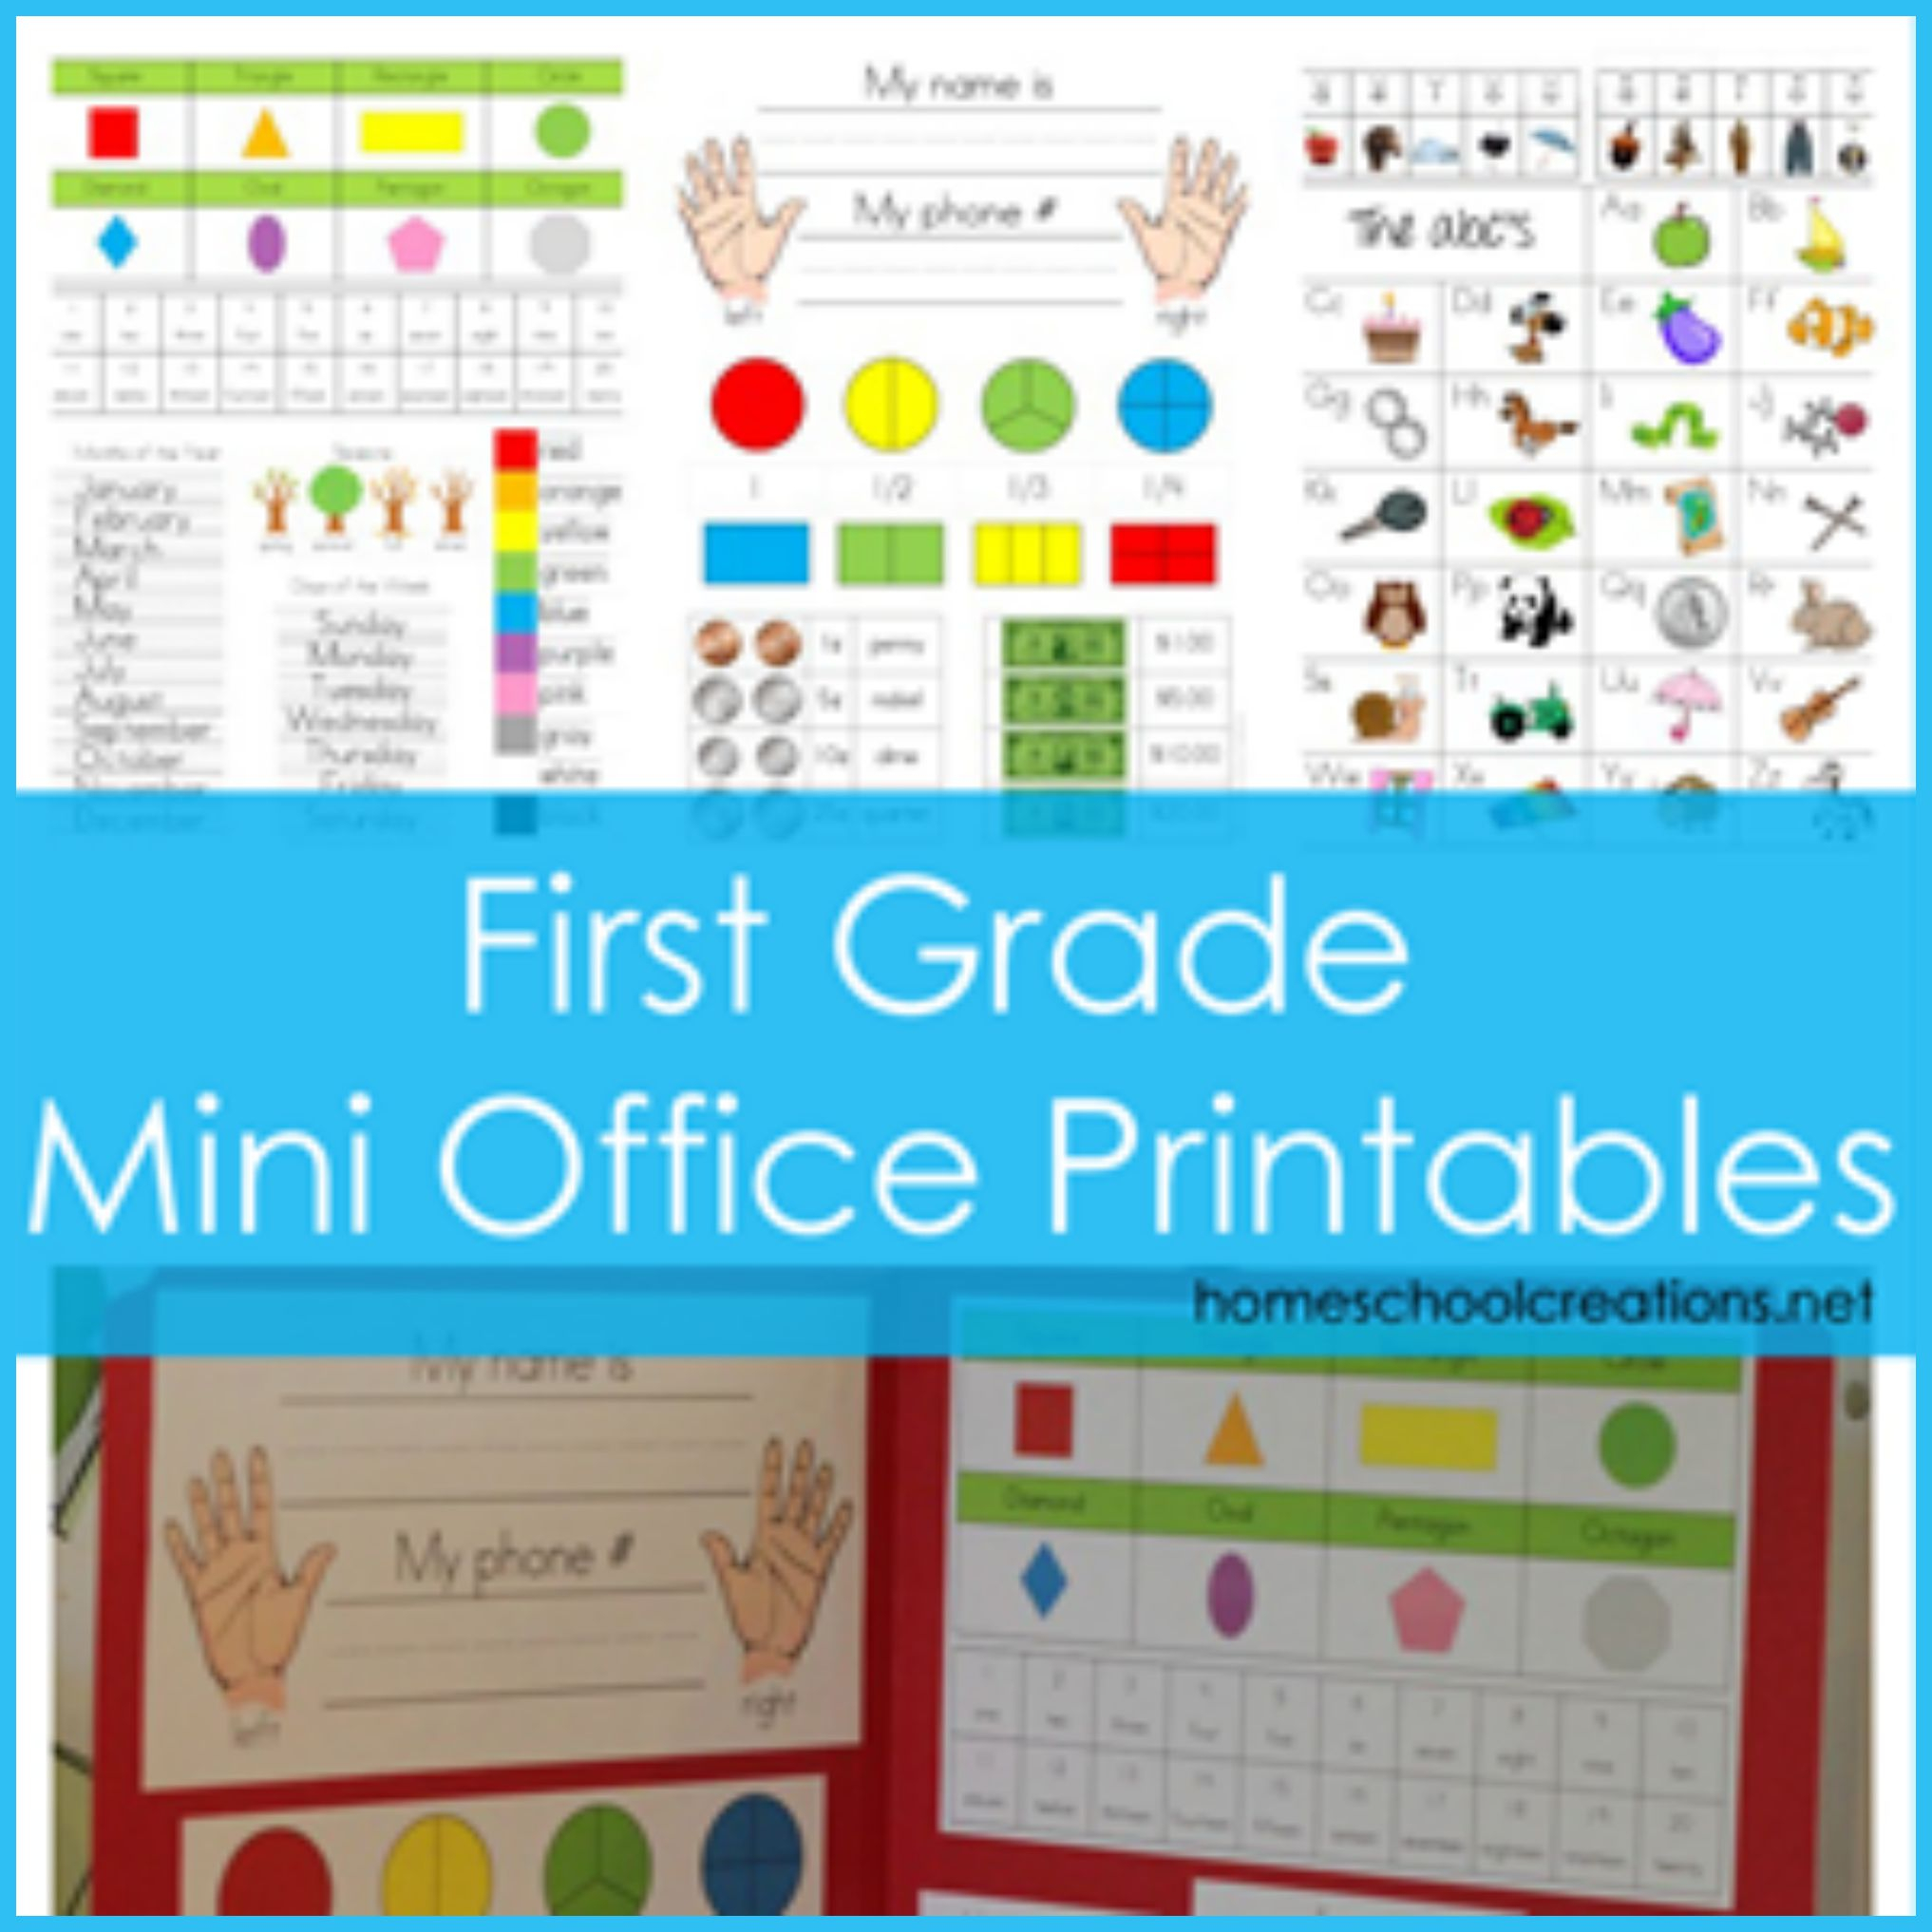 First Grade Mini Office Printables